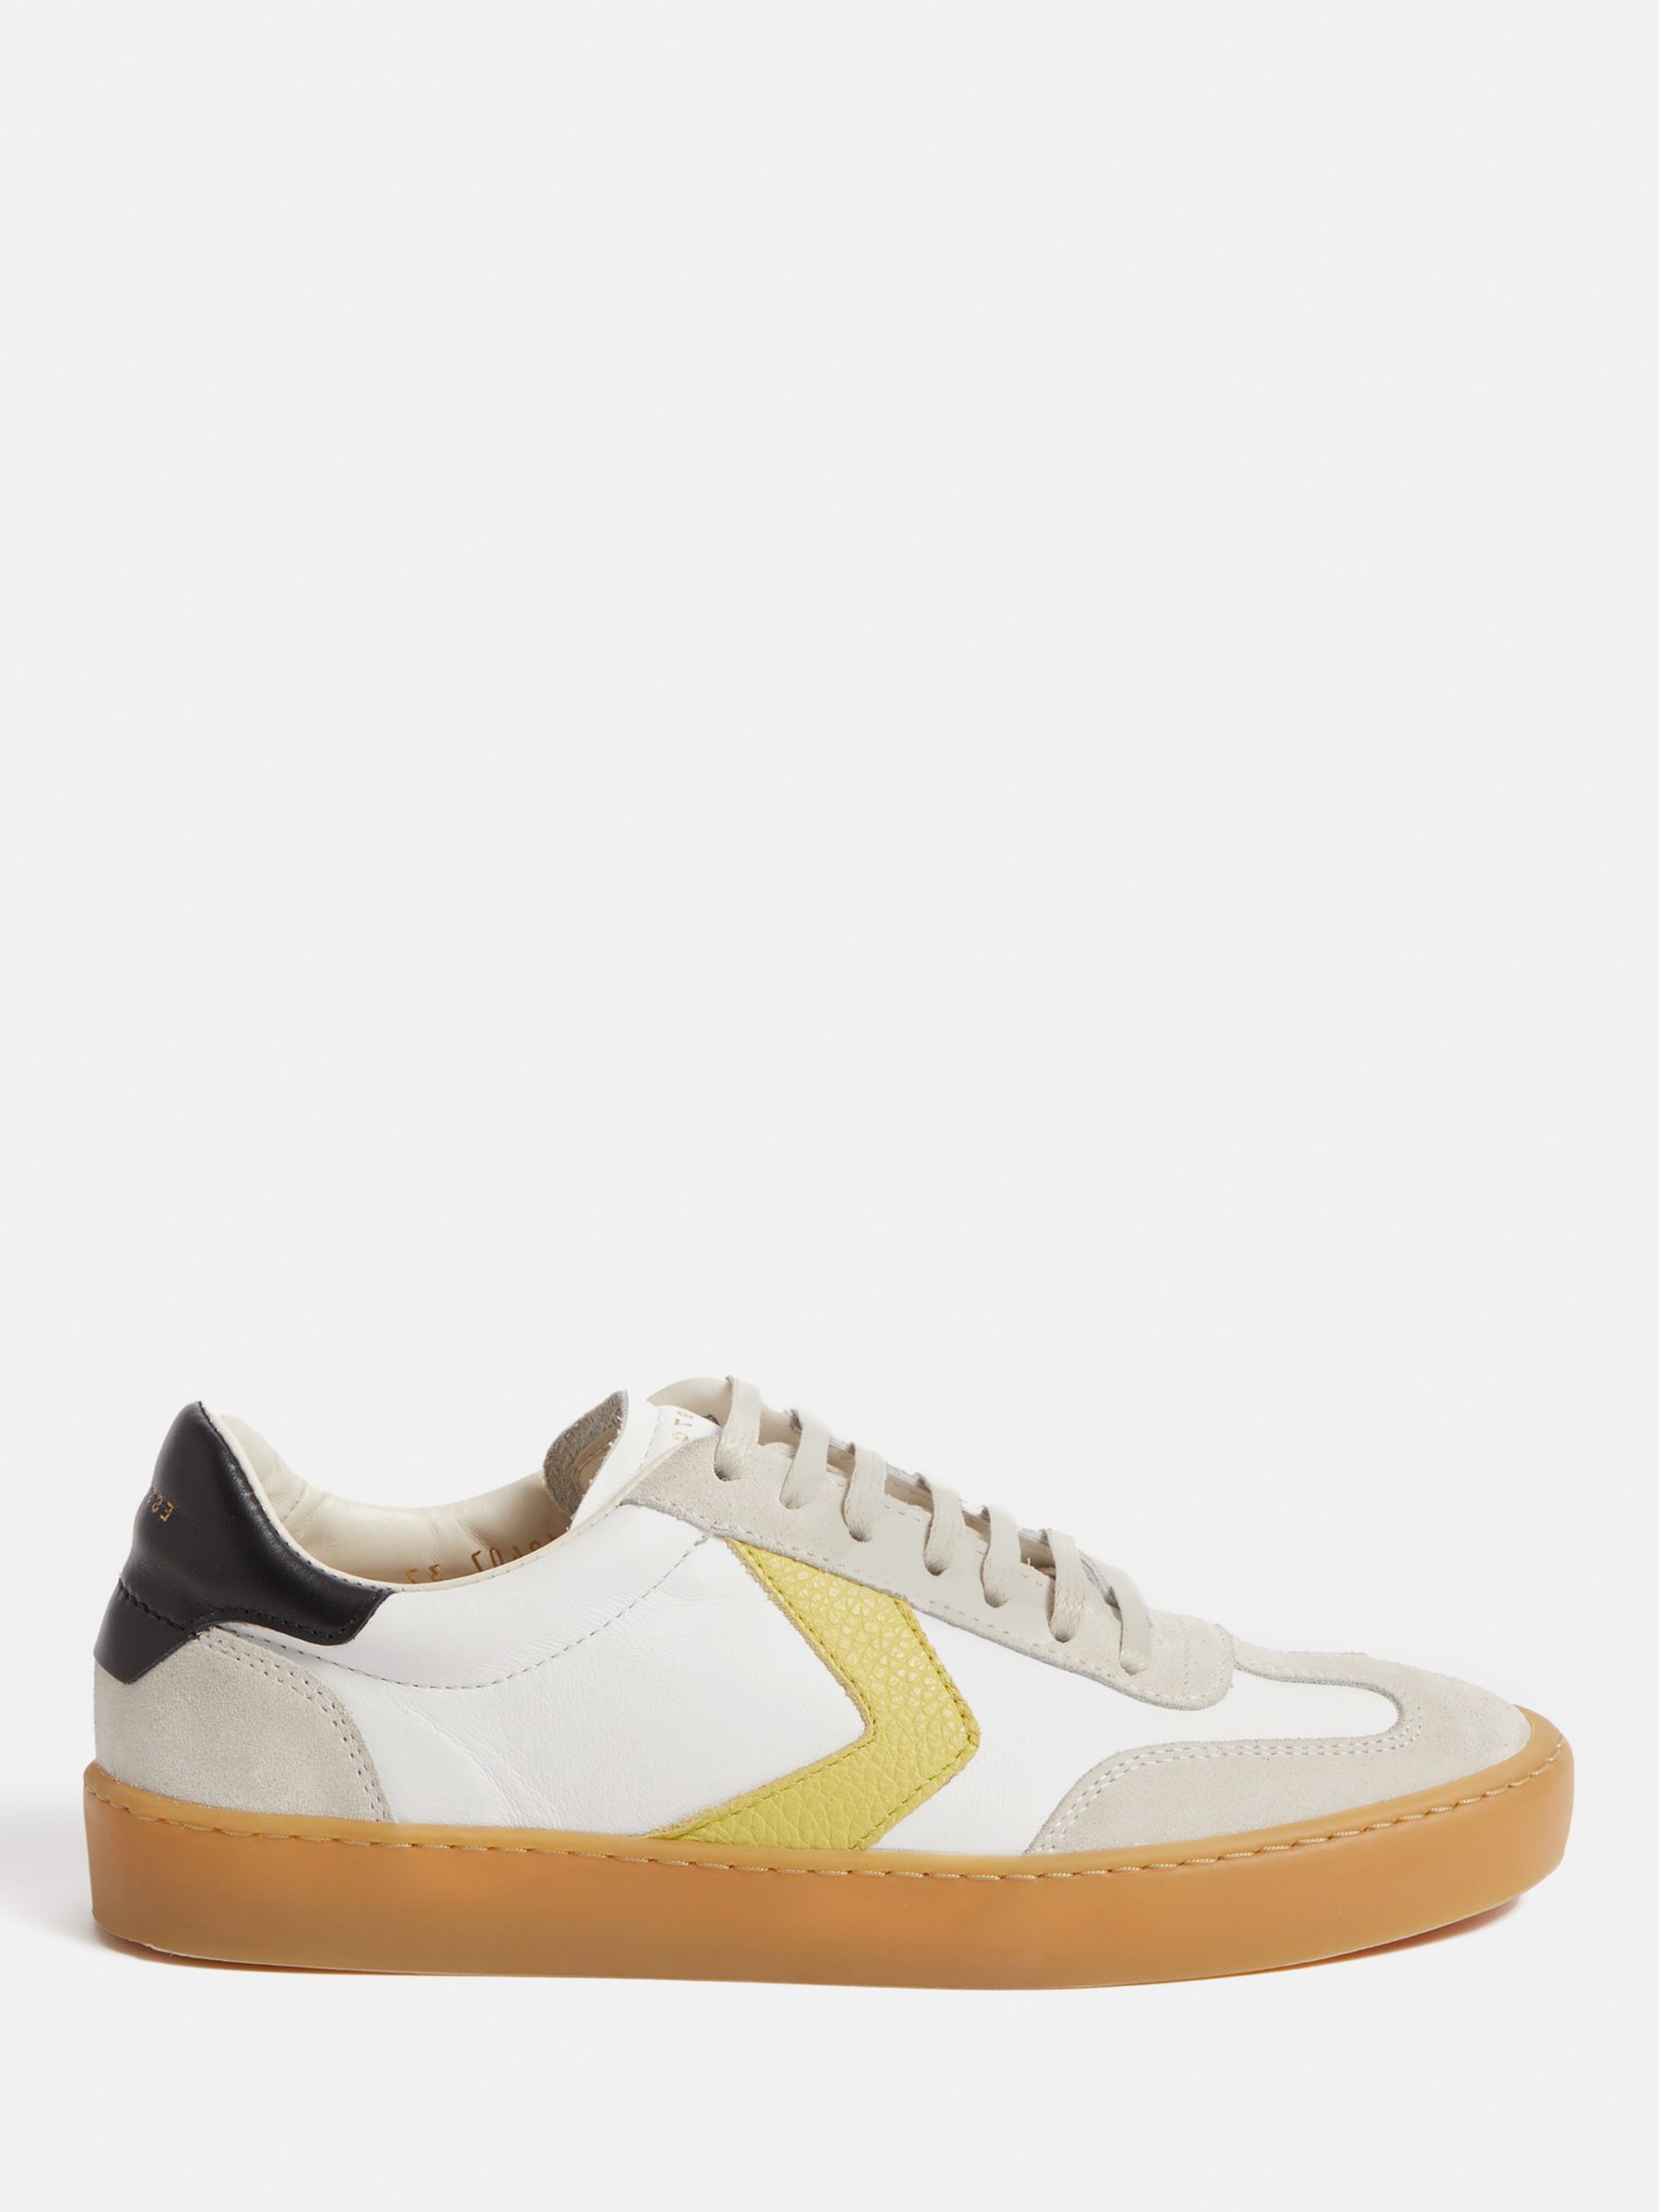 Jigsaw Portland Leather Low Top Trainers, White/Multi at John Lewis ...